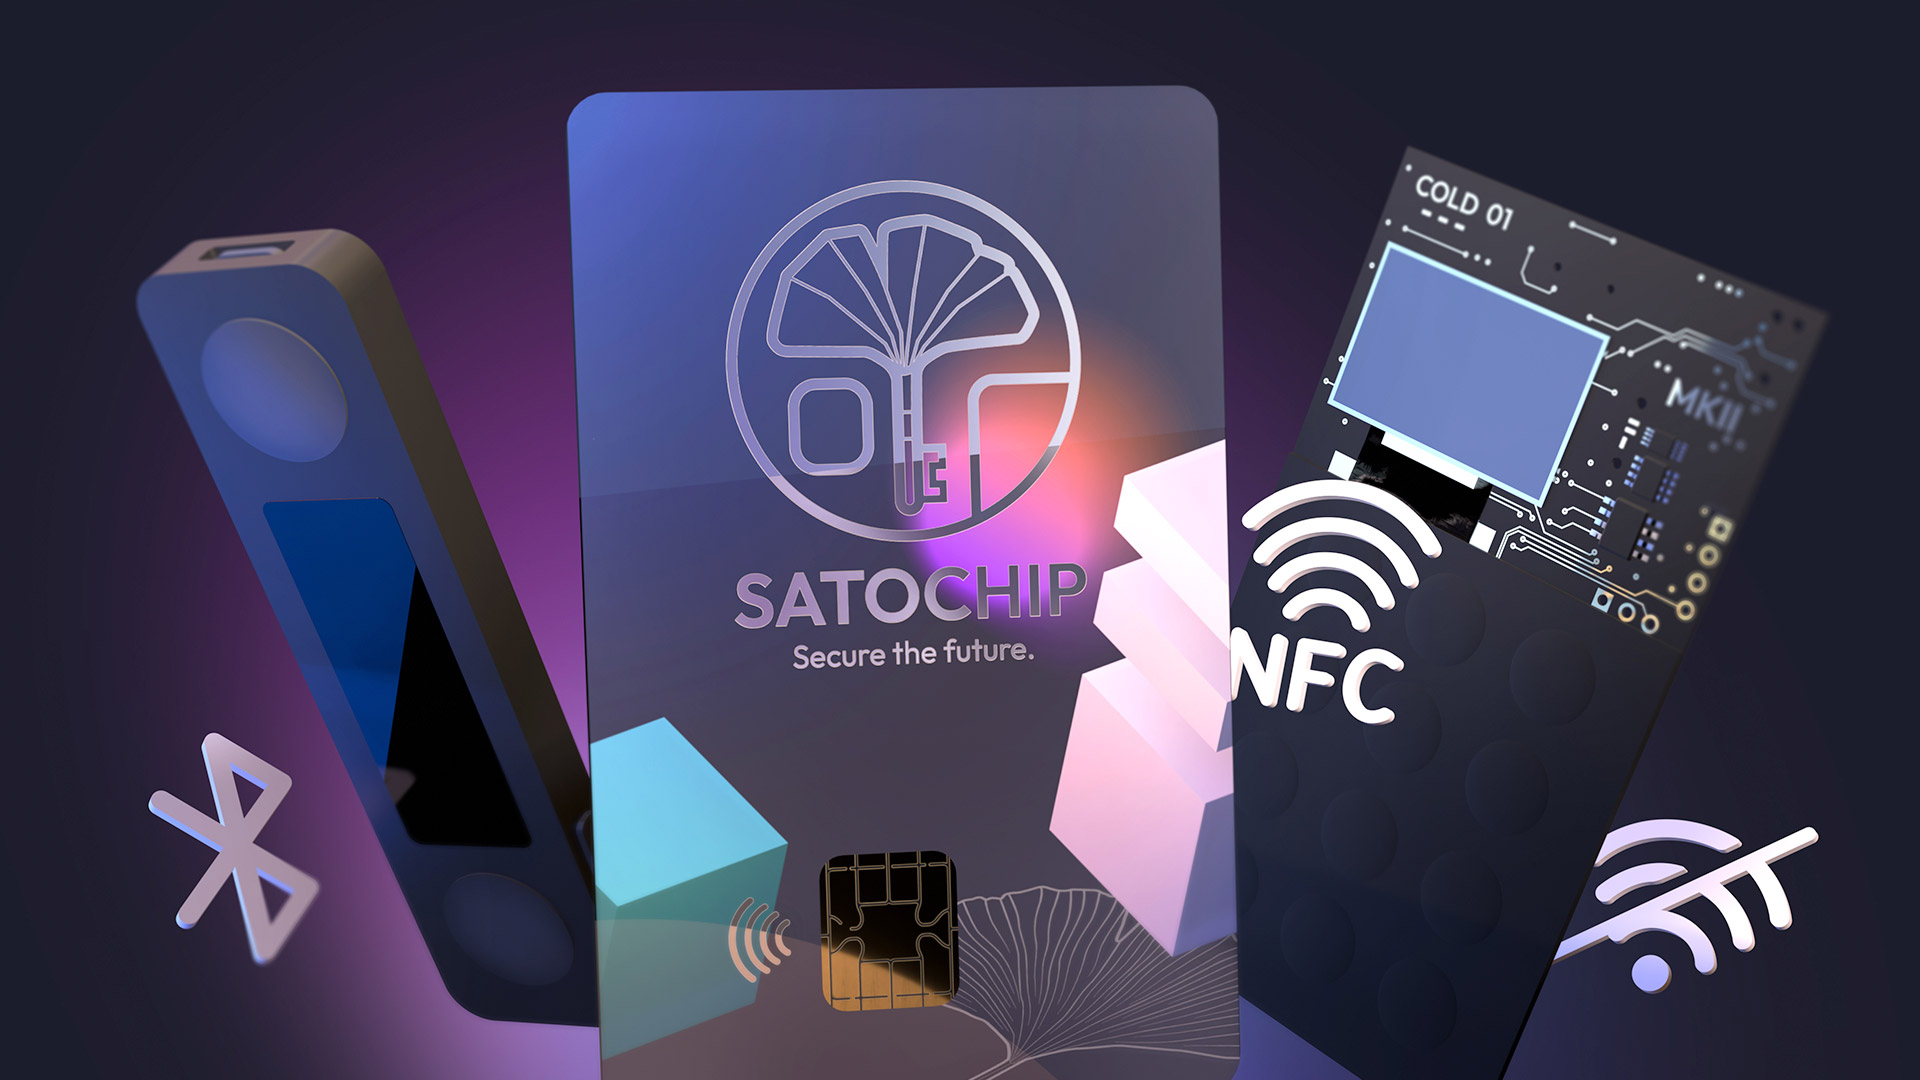 Satochip - Hardware solutions to help you manage your cryptocurrency